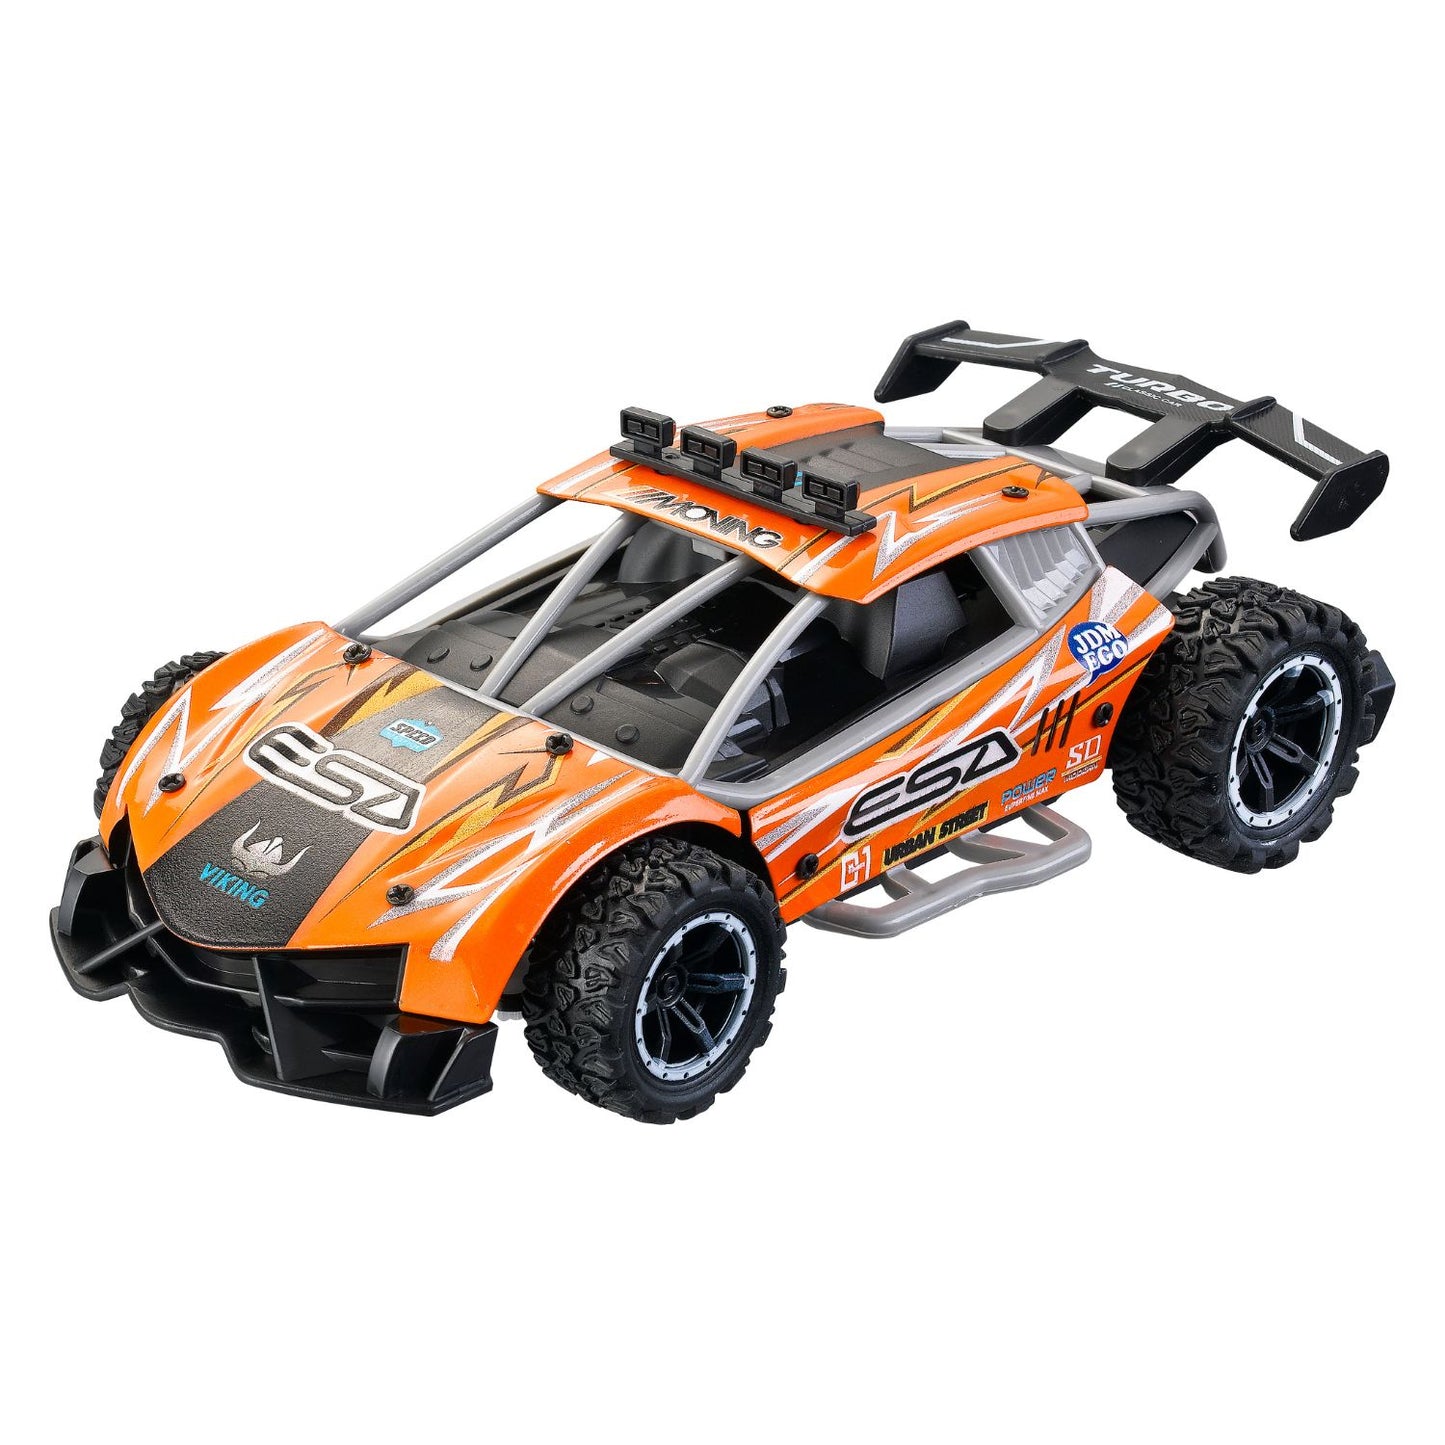 Re.El - Mad Max Jr Radio Controlled 2.4 Ghz, 1:24 Scale